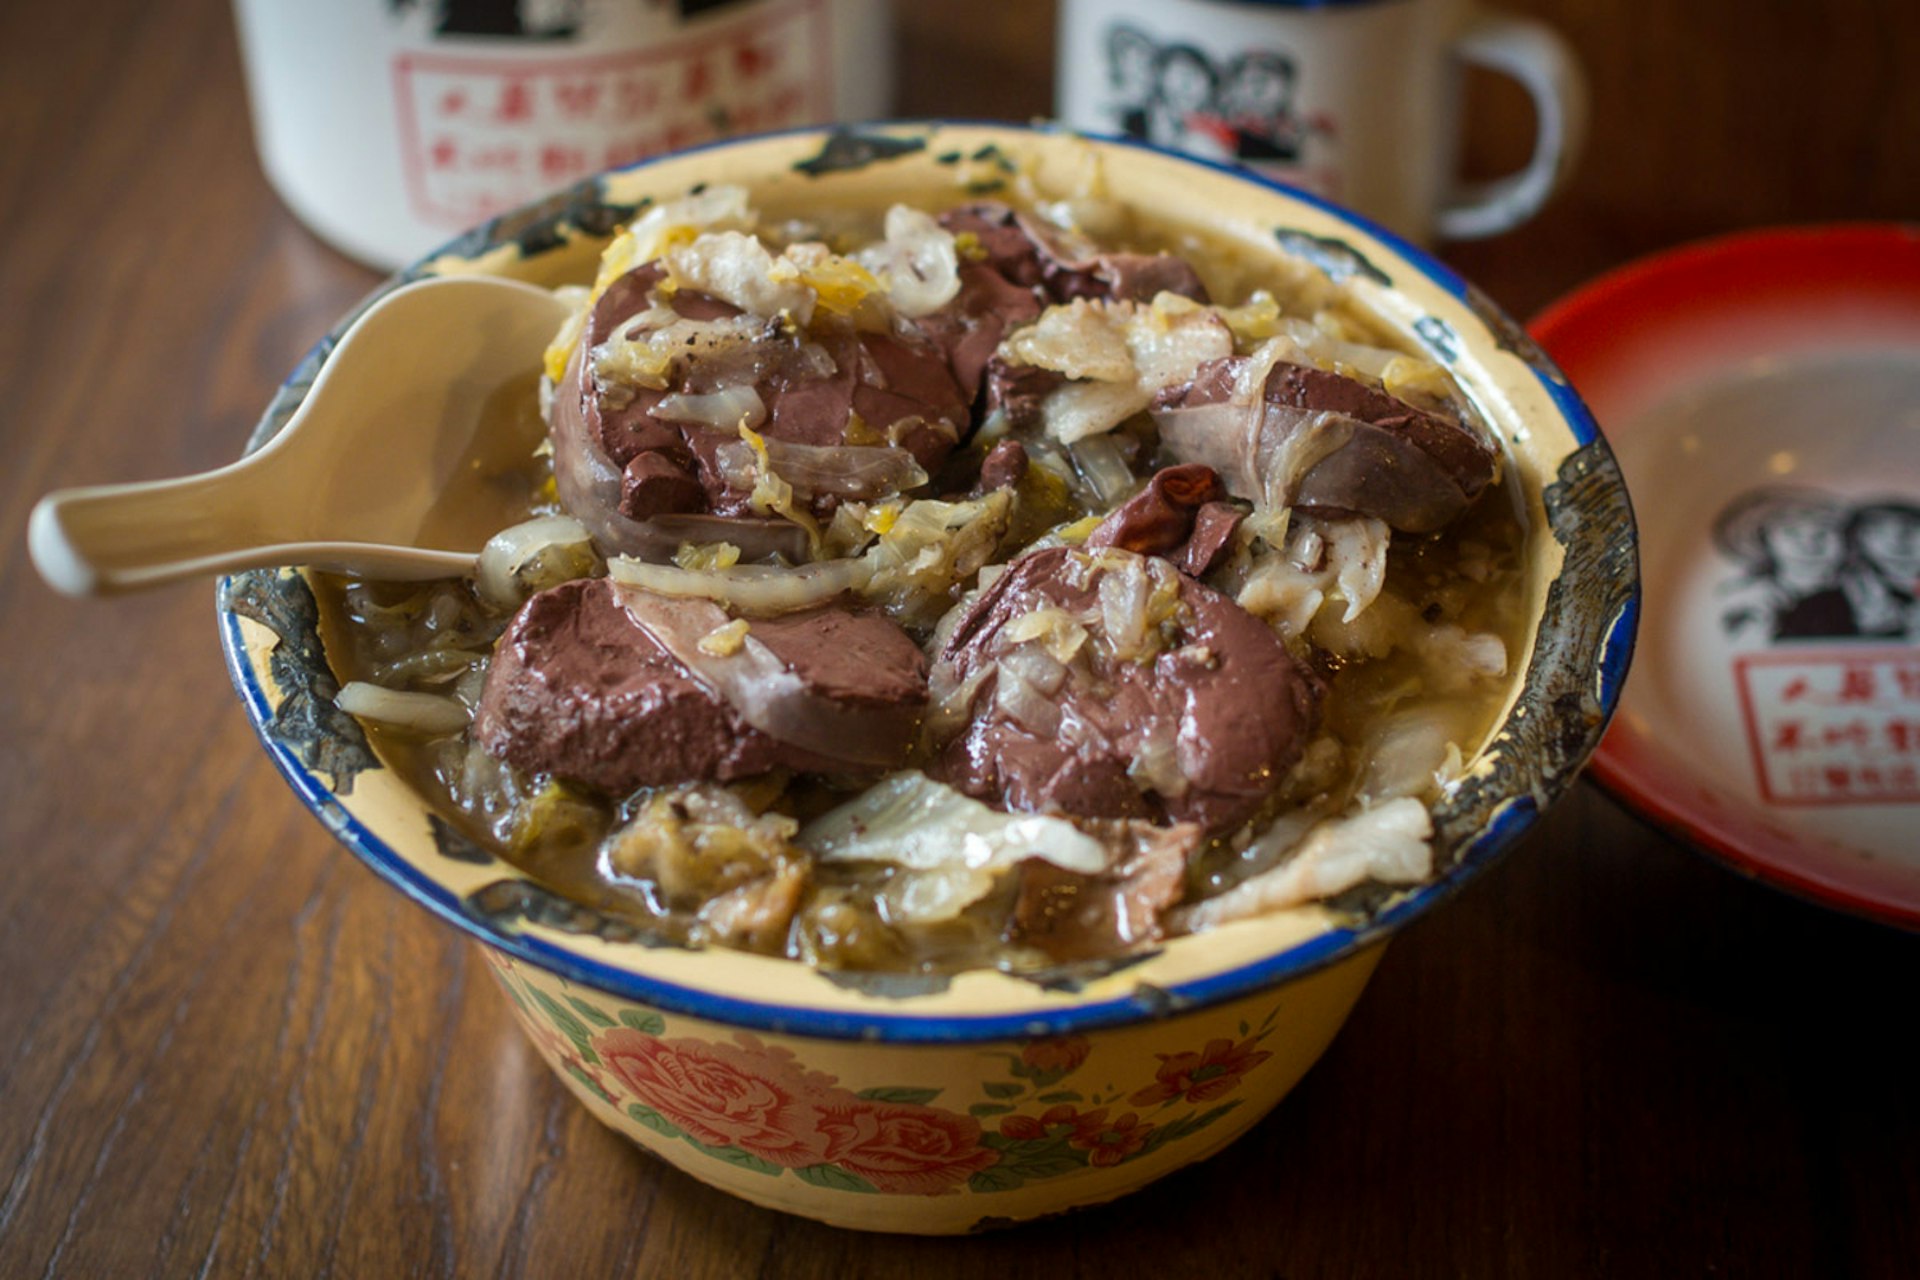 Sauerkraut stew: suancai zhupai. Image by Tom O'Malley / Lonely Planet